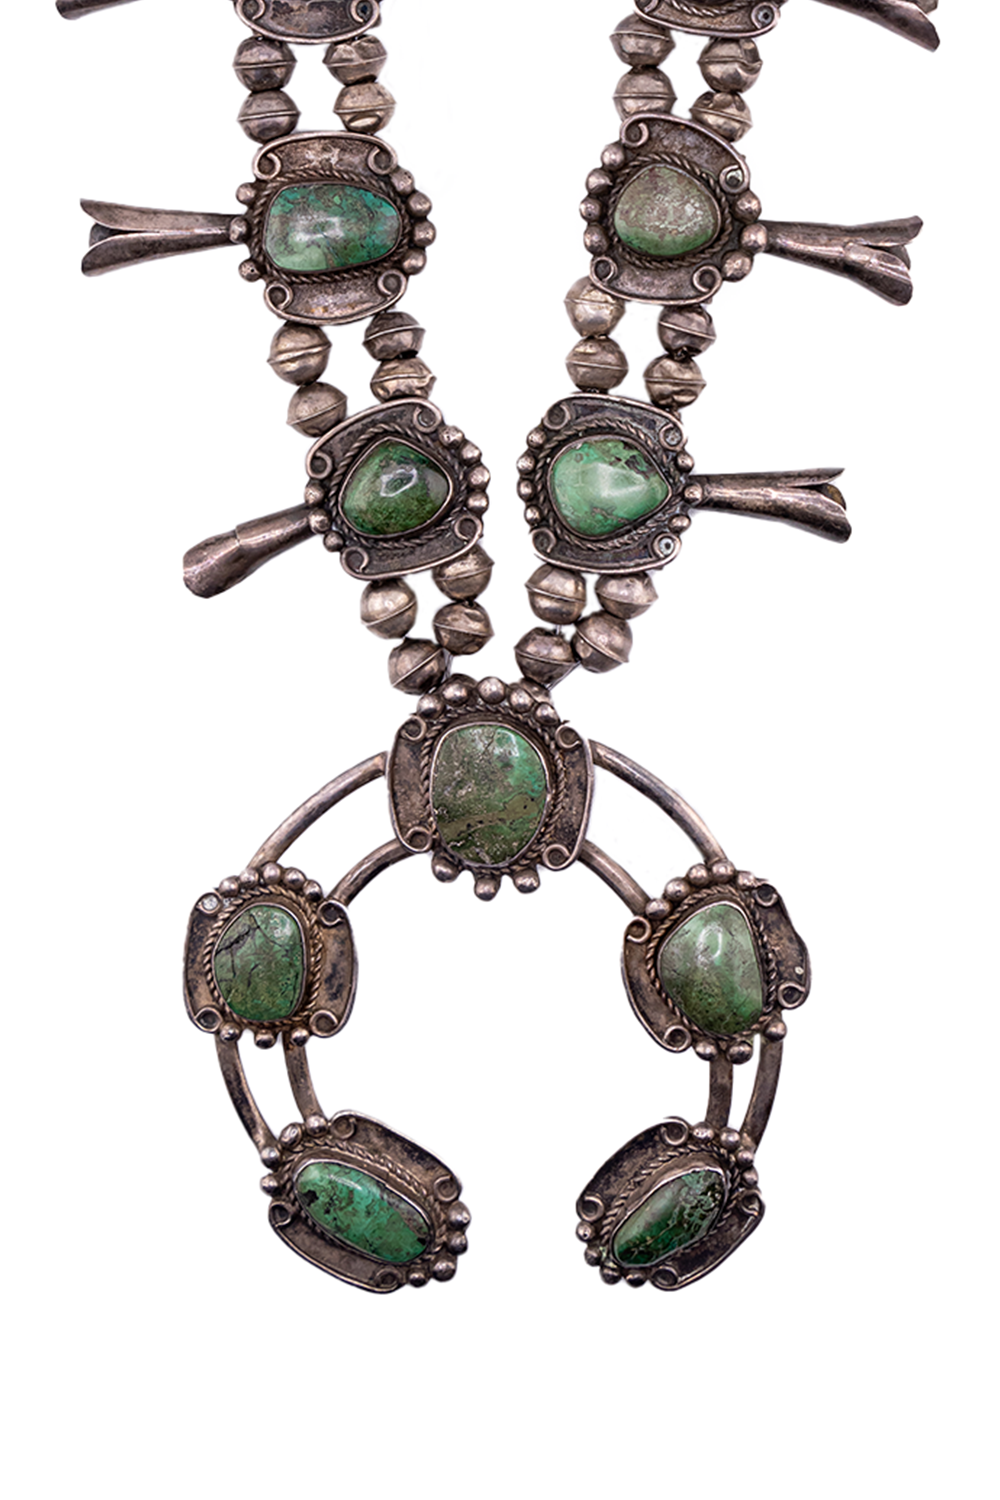 Very Old Navajo Carico Lake Turquoise Squash Blossom Necklace